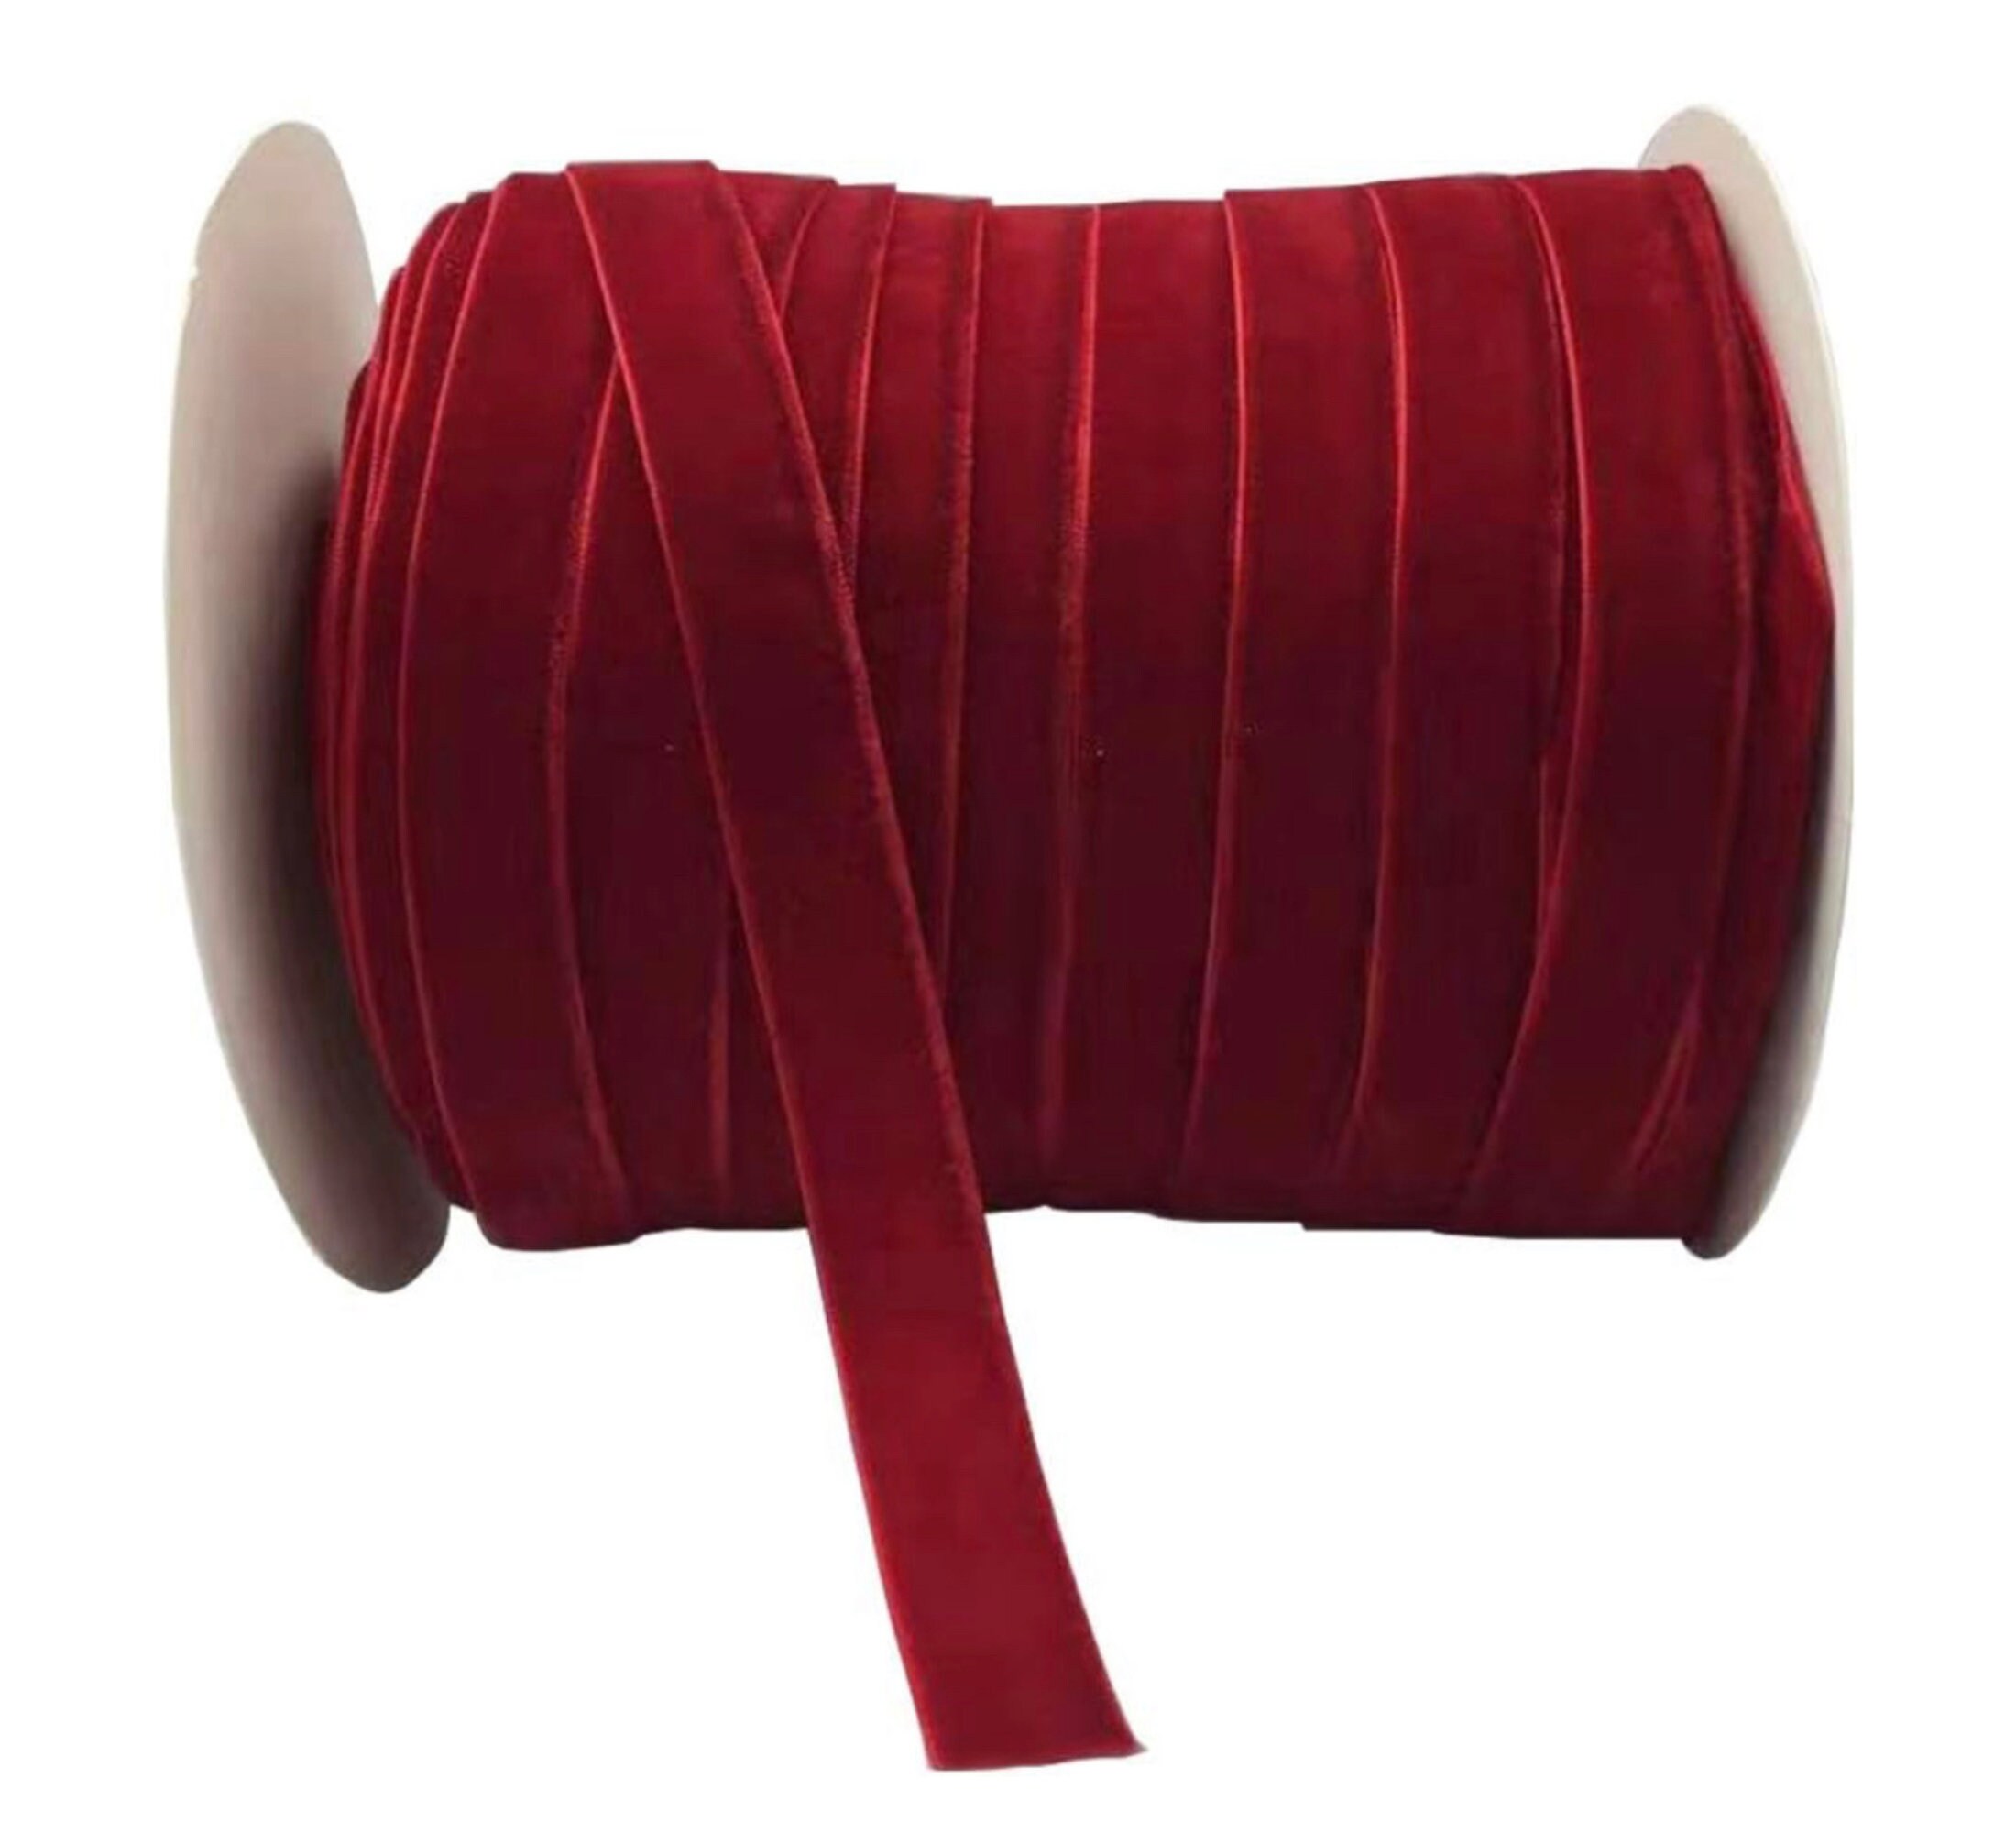 Ewaymado Red Velvet Ribbon 1 inch x 20Yd,Great for Gift Wrapping,Hair Bows,Christmas,Wedding Party Decoration(1 Red)